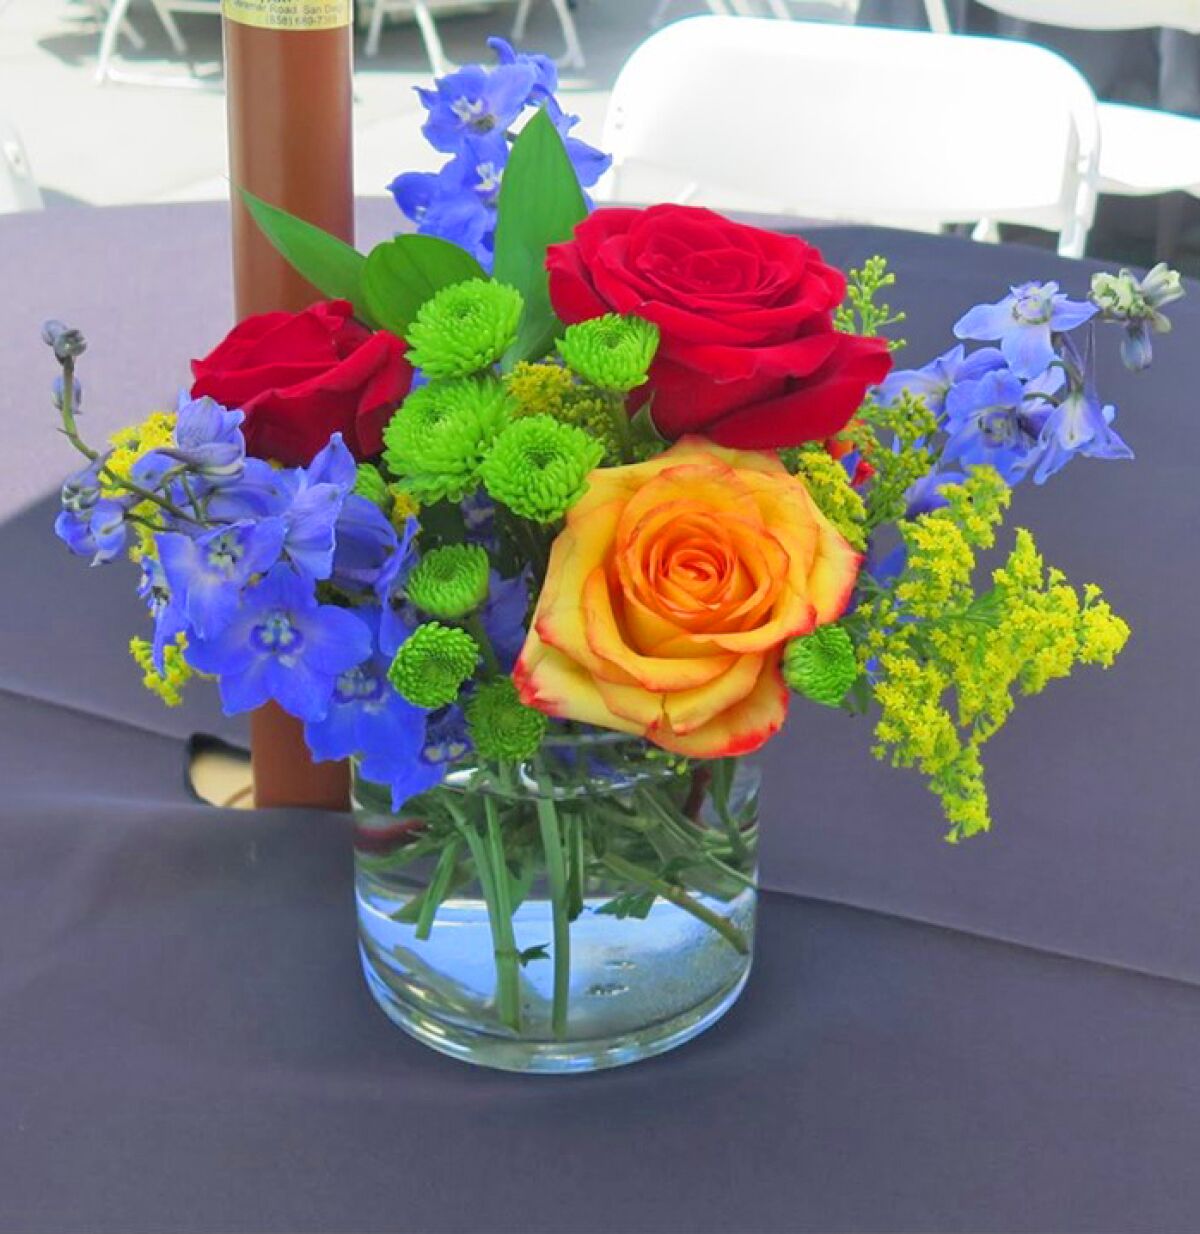 Learn the techniques of floral arrangement at the educational exhibits during the Master Gardener Plant Sale.